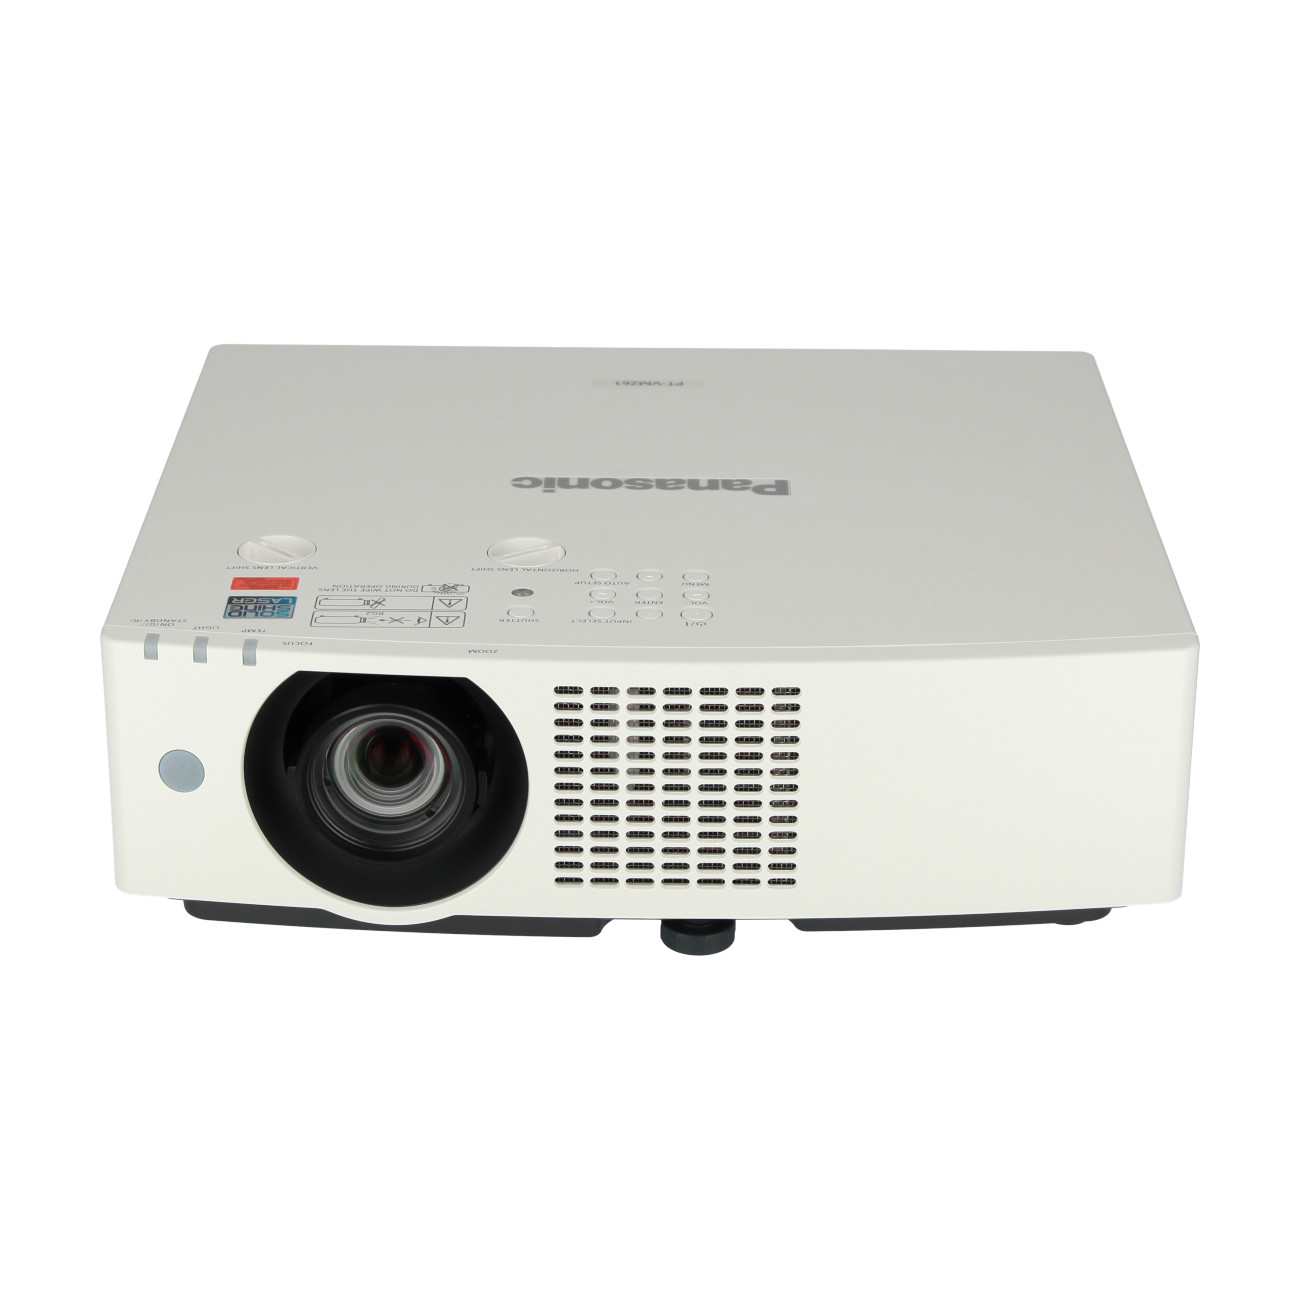 Panasonic PT-VMZ61- WUXGA laser projector with 6200 ANSI lumens and  flexible zoom extender function, white